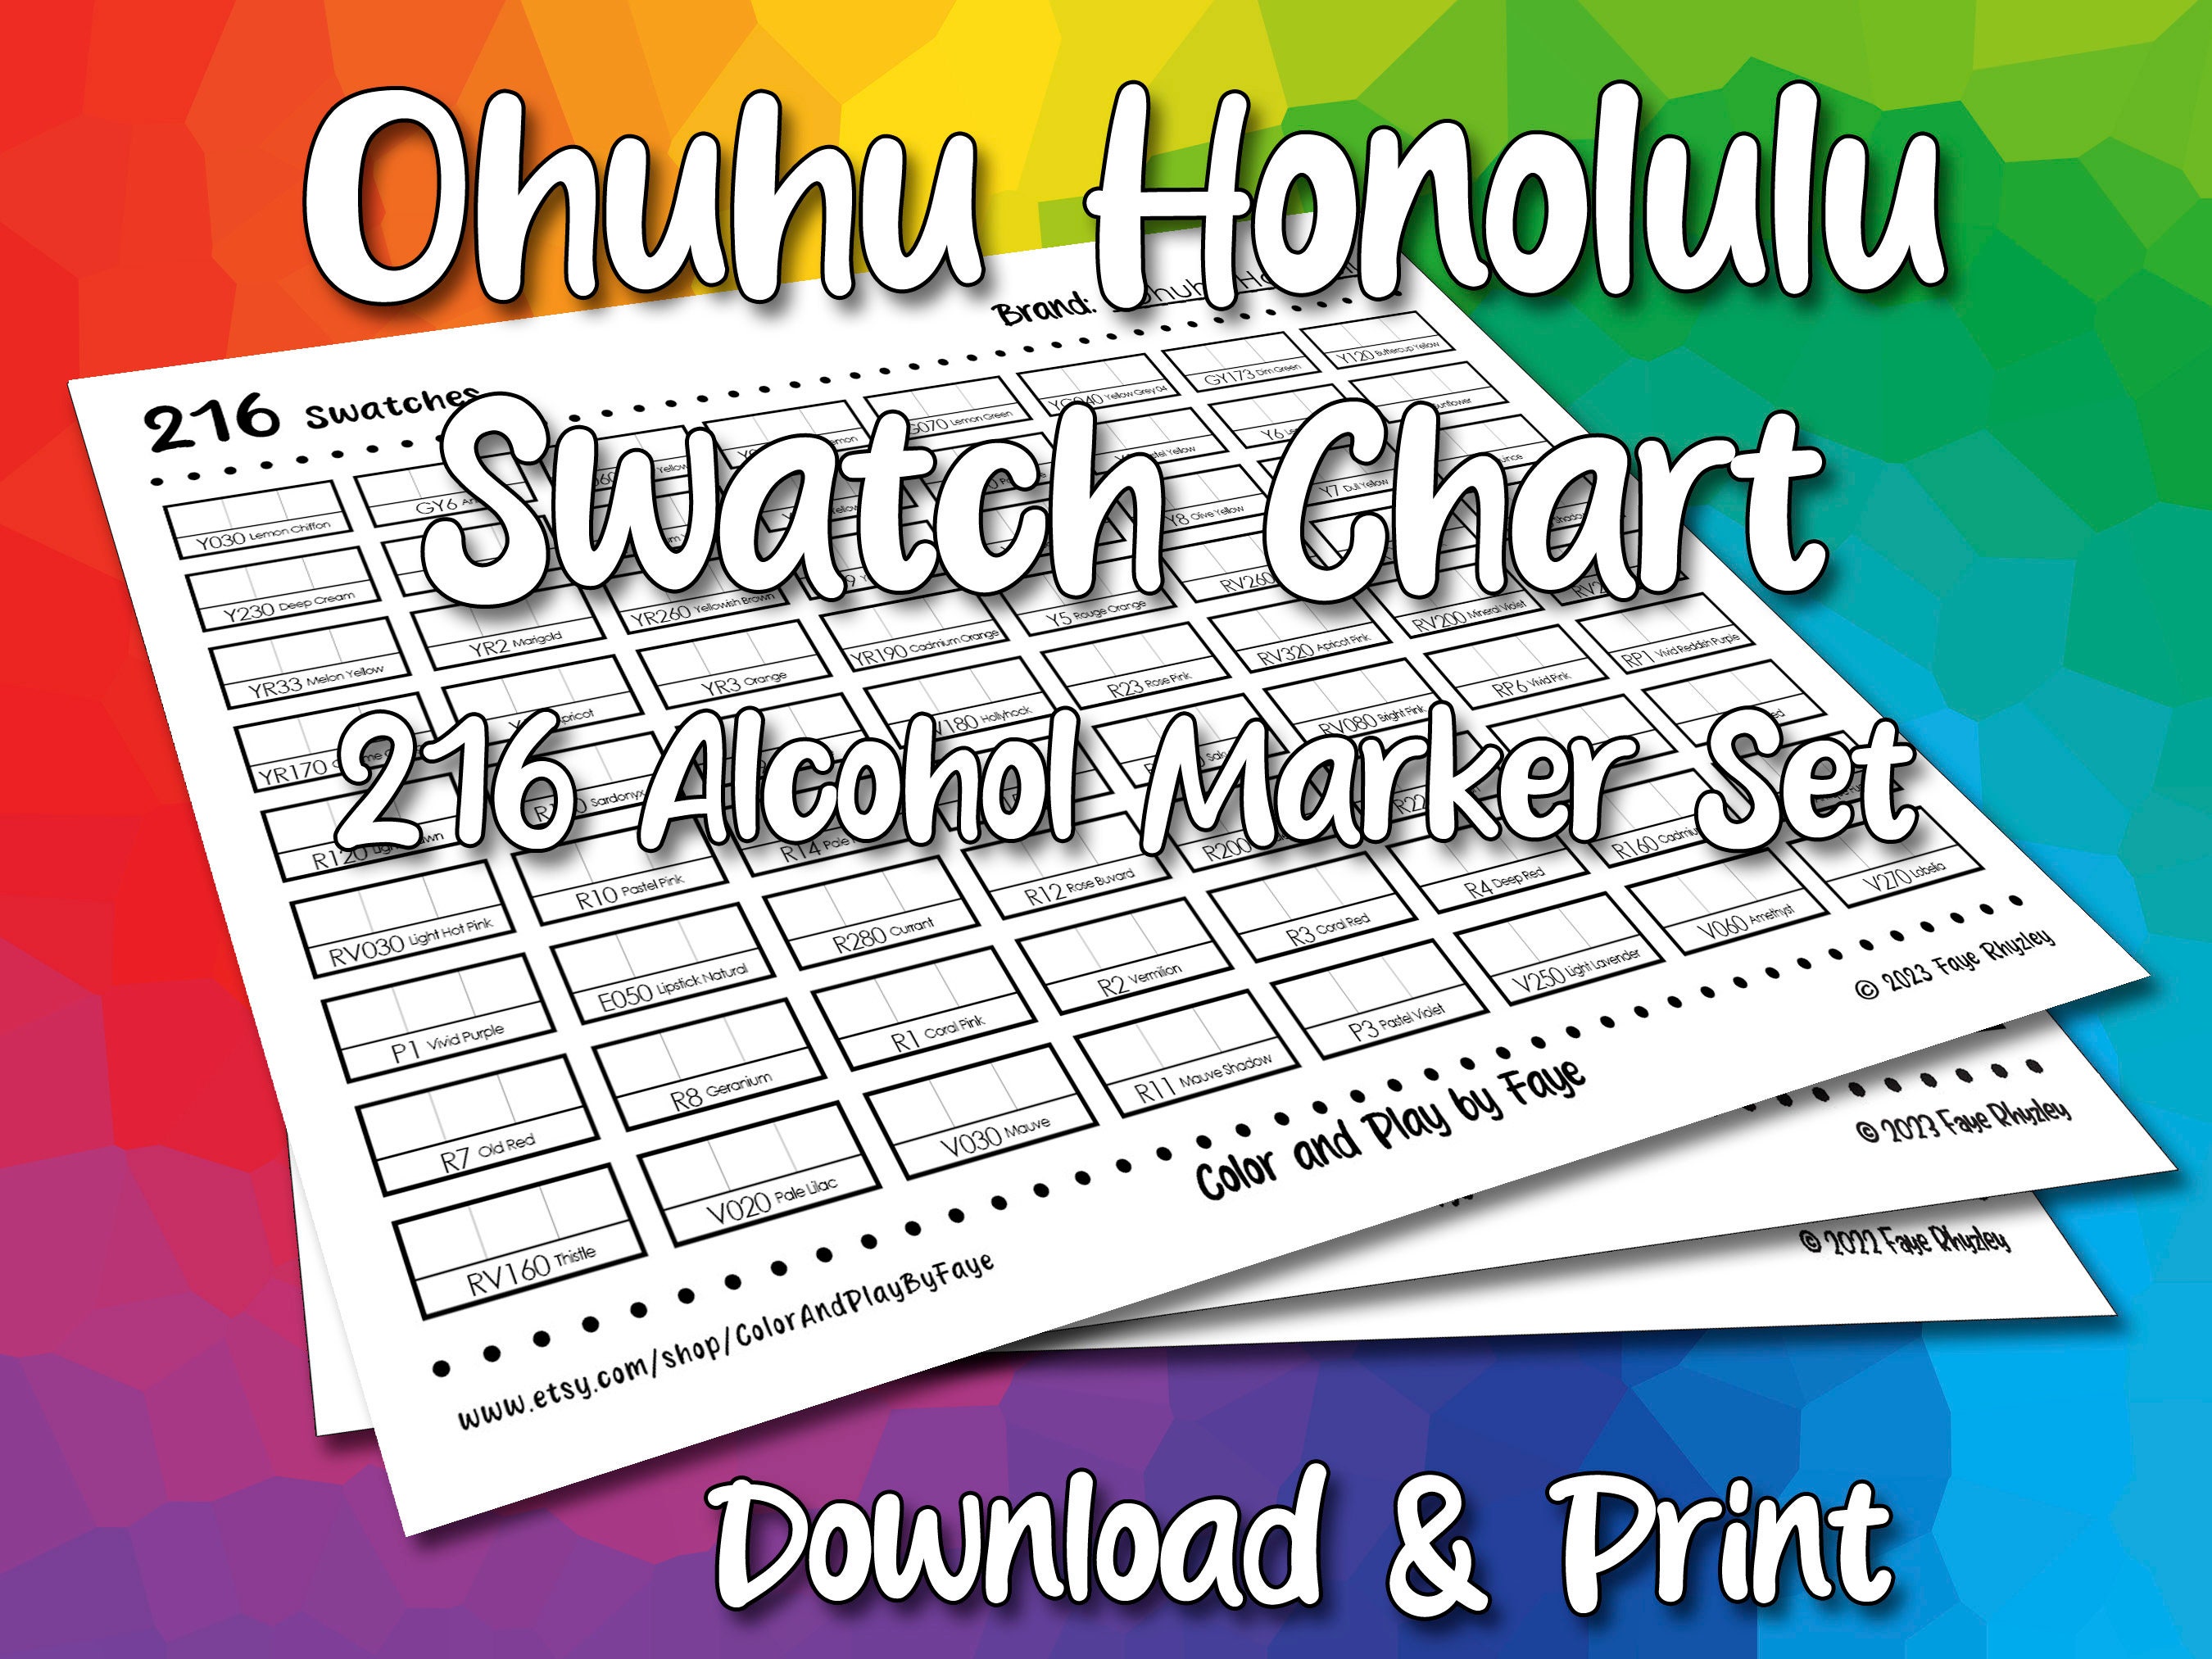 Ohuhu Alcohol Markers 320 Colors - Chisel & Fine Germany